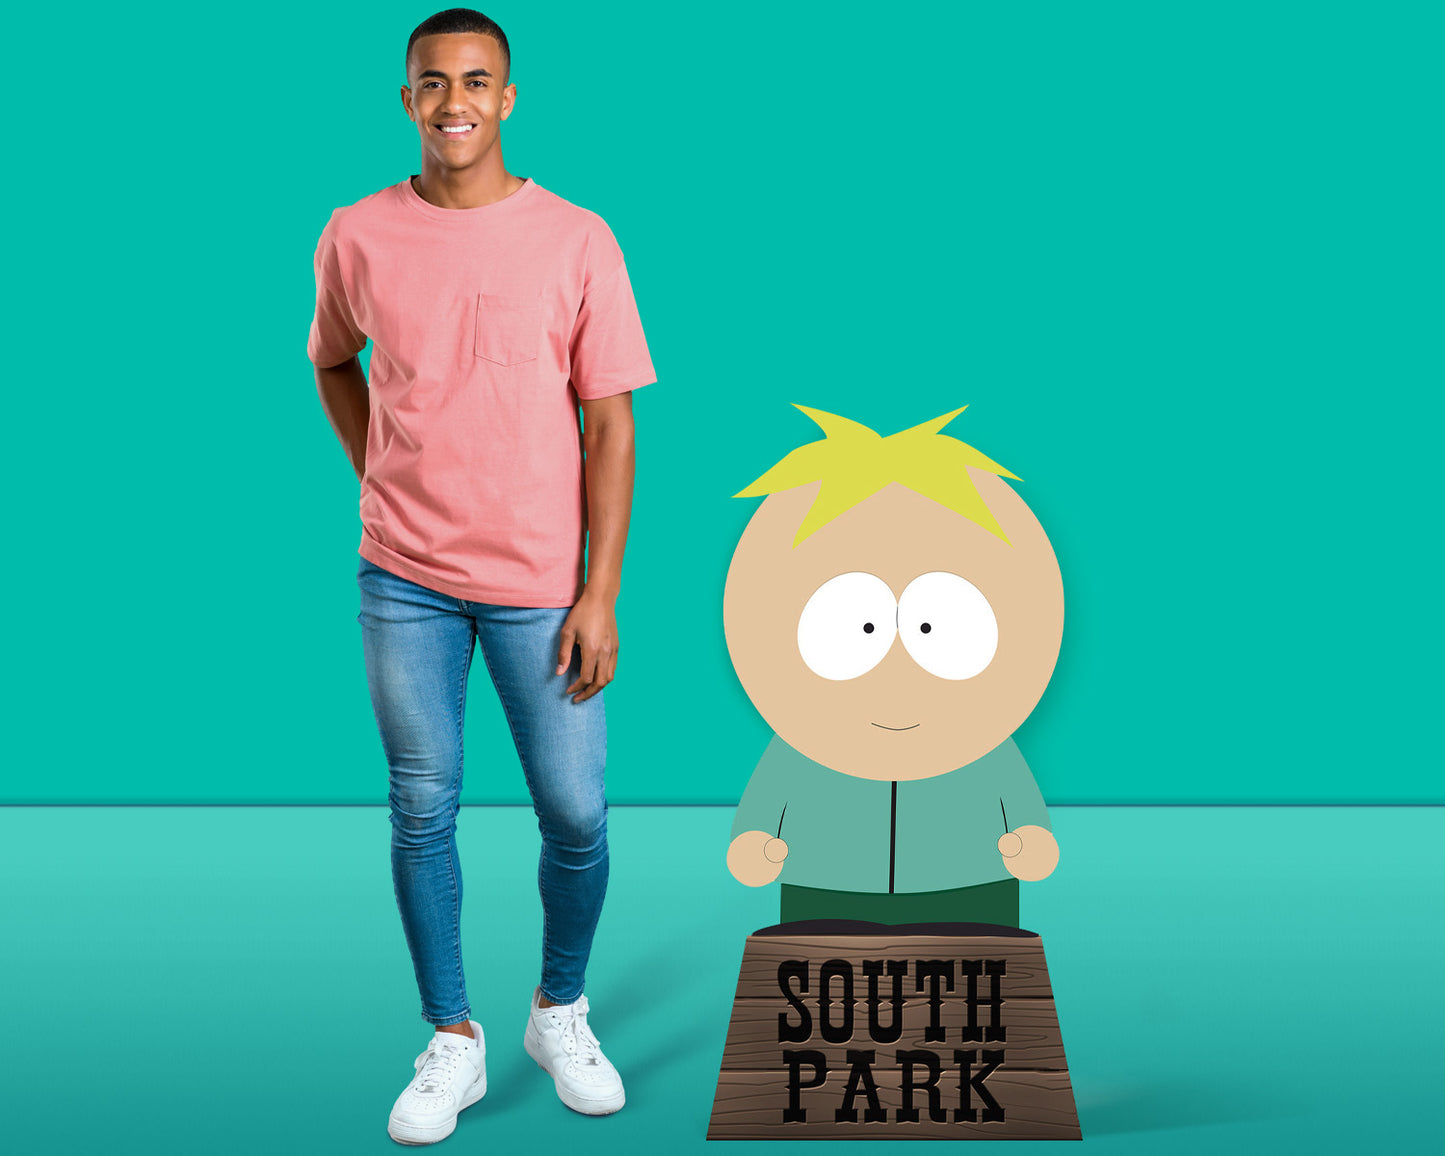 South Park Butters Life-Sized Cardboard Cutout Standee